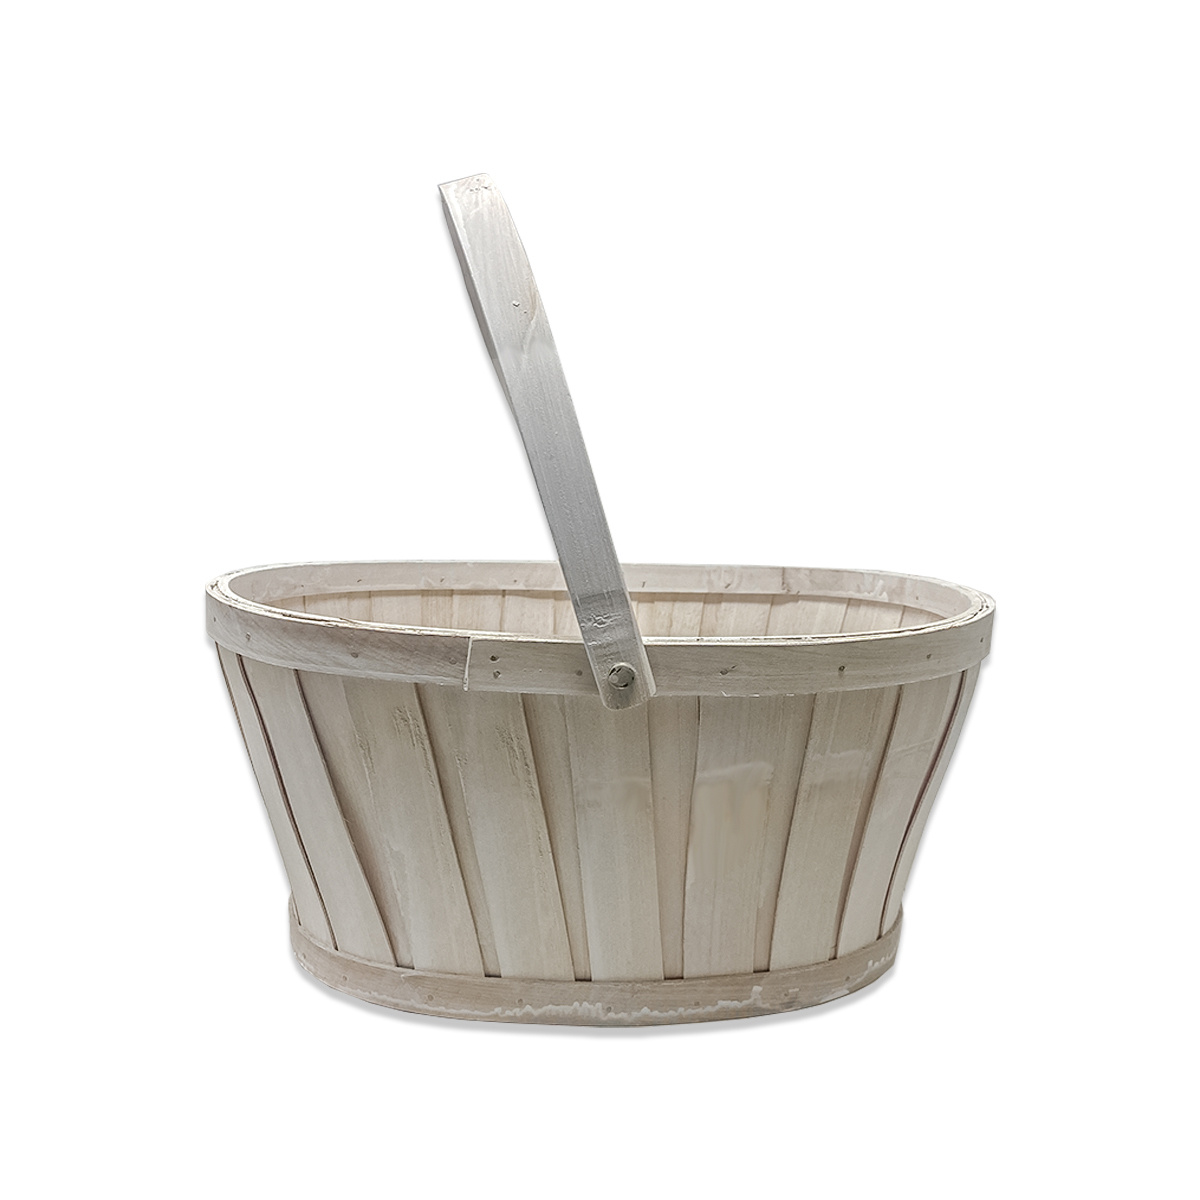 Oval Woodchip Handle Basket - White Wash 13 in